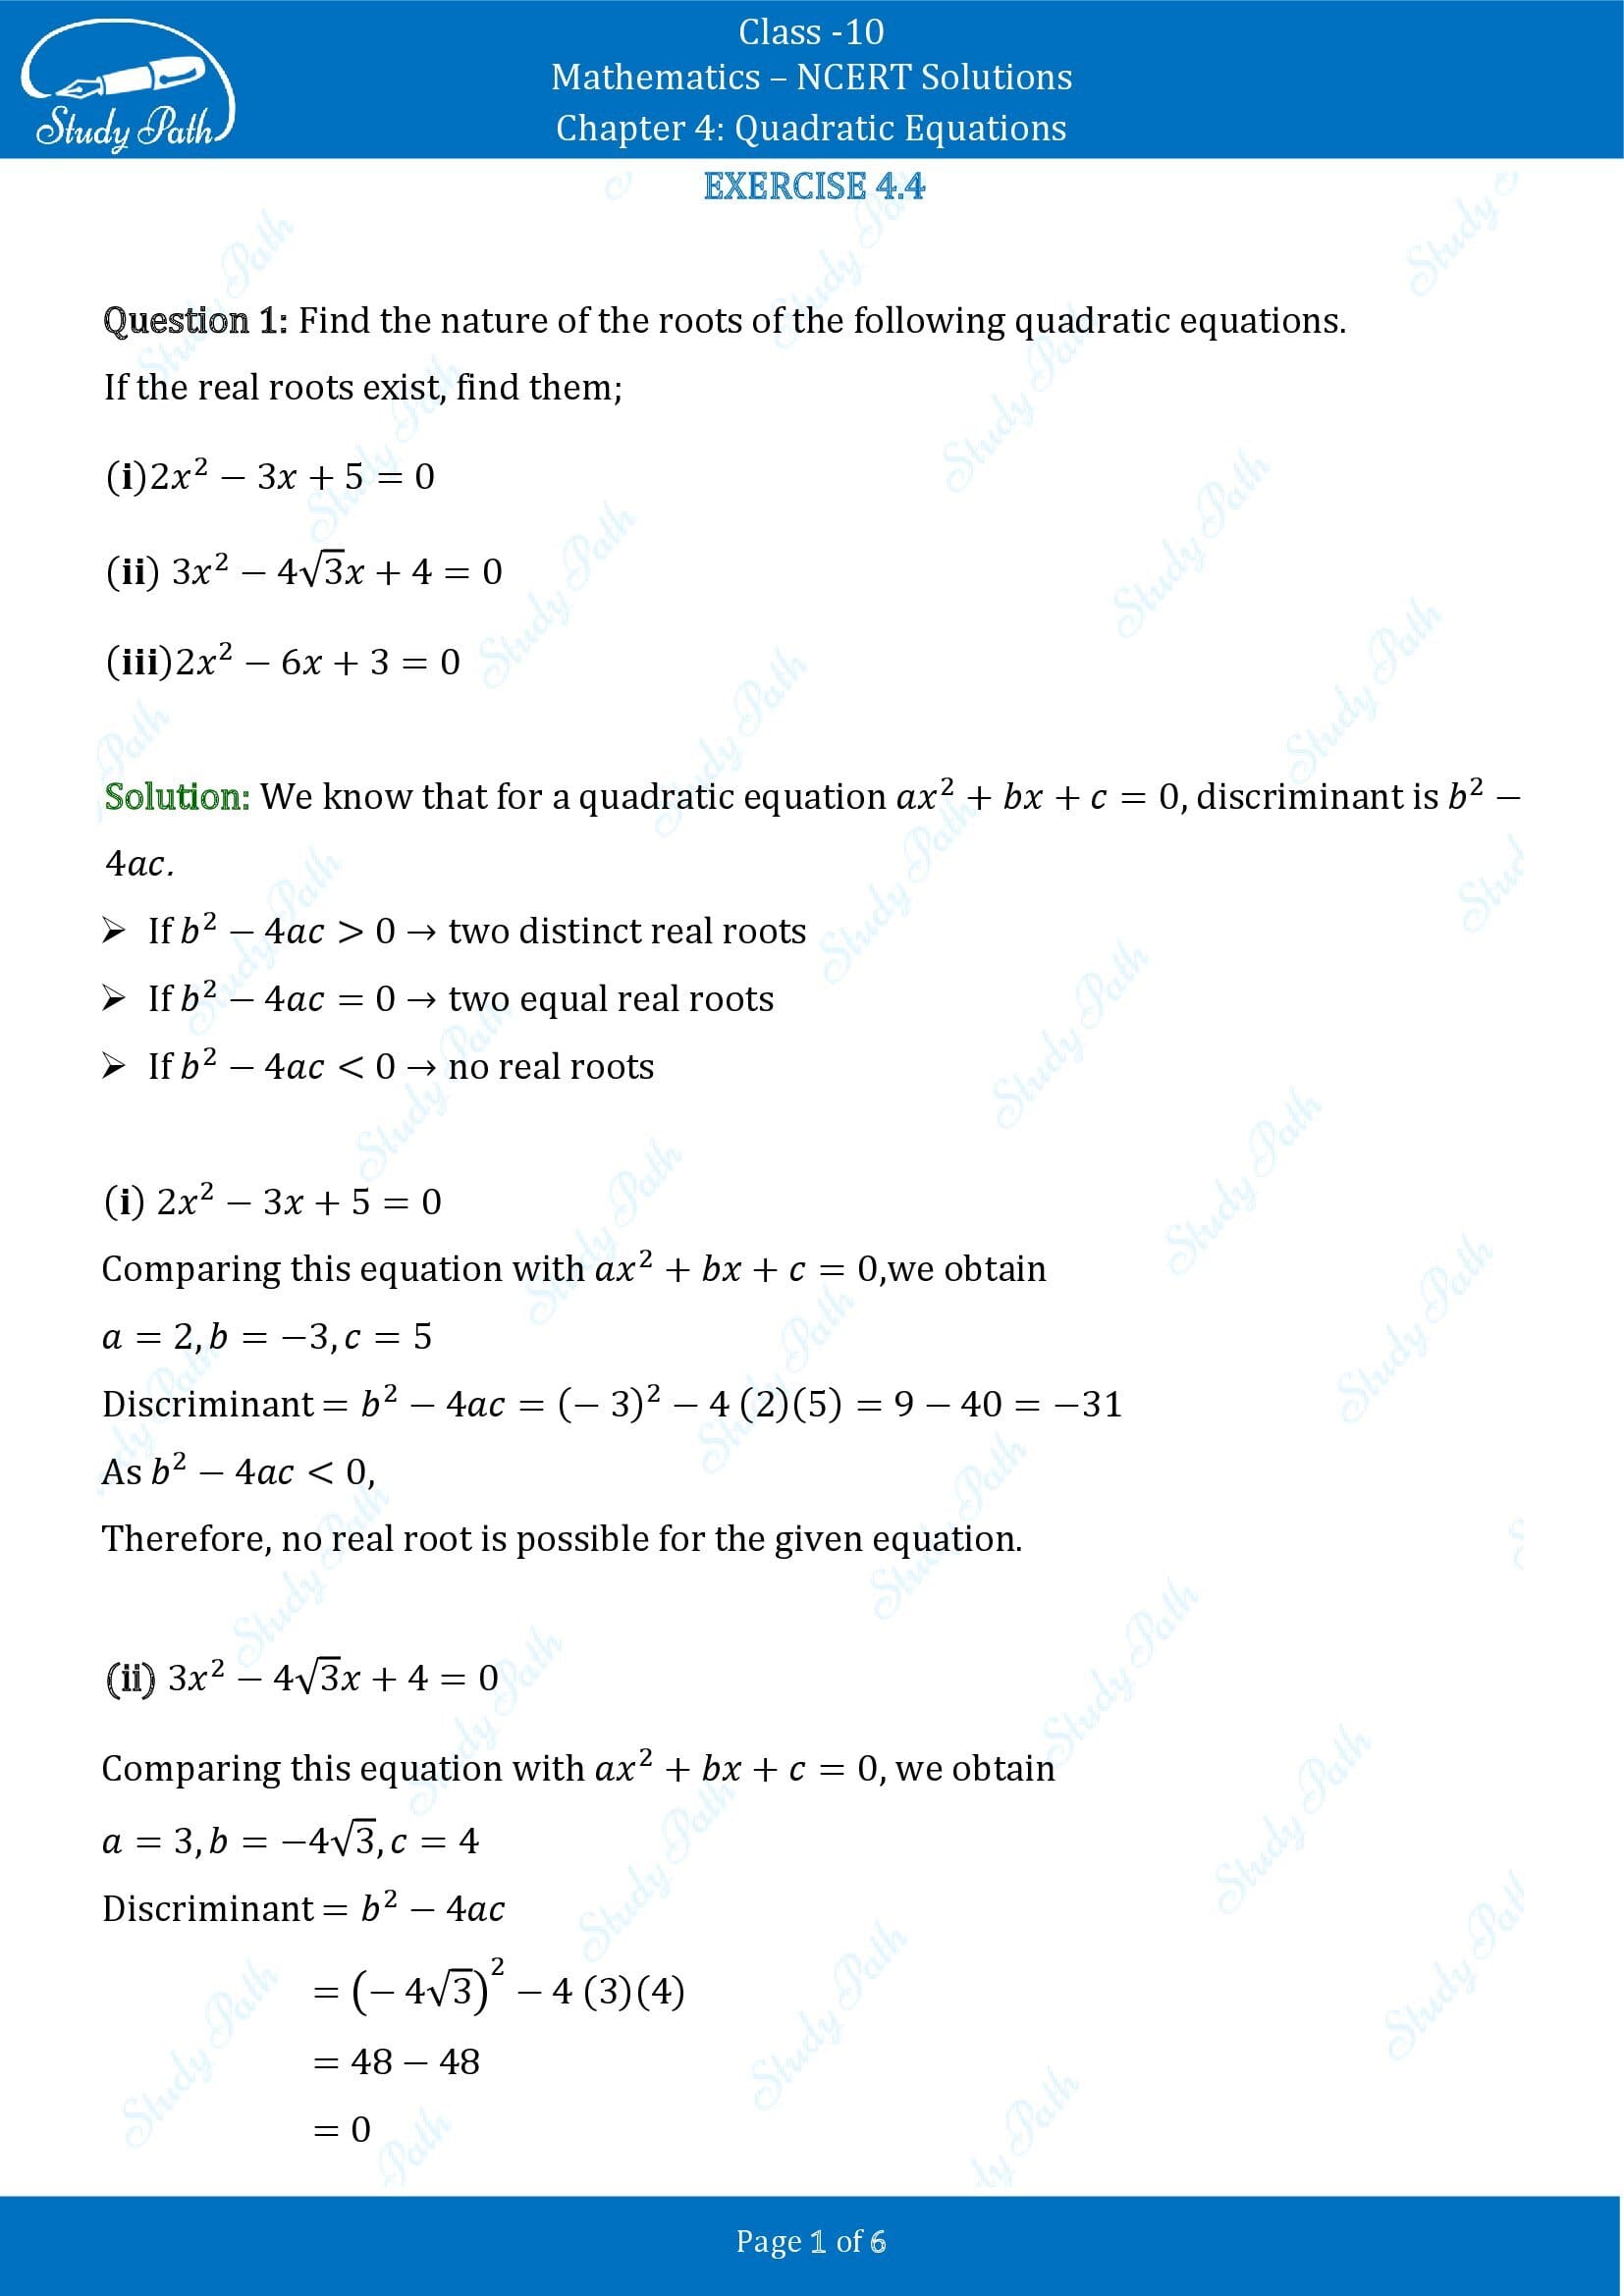 NCERT Solutions for Class 10 Maths Chapter 4 Quadratic Equations Exercise 4.4 00001